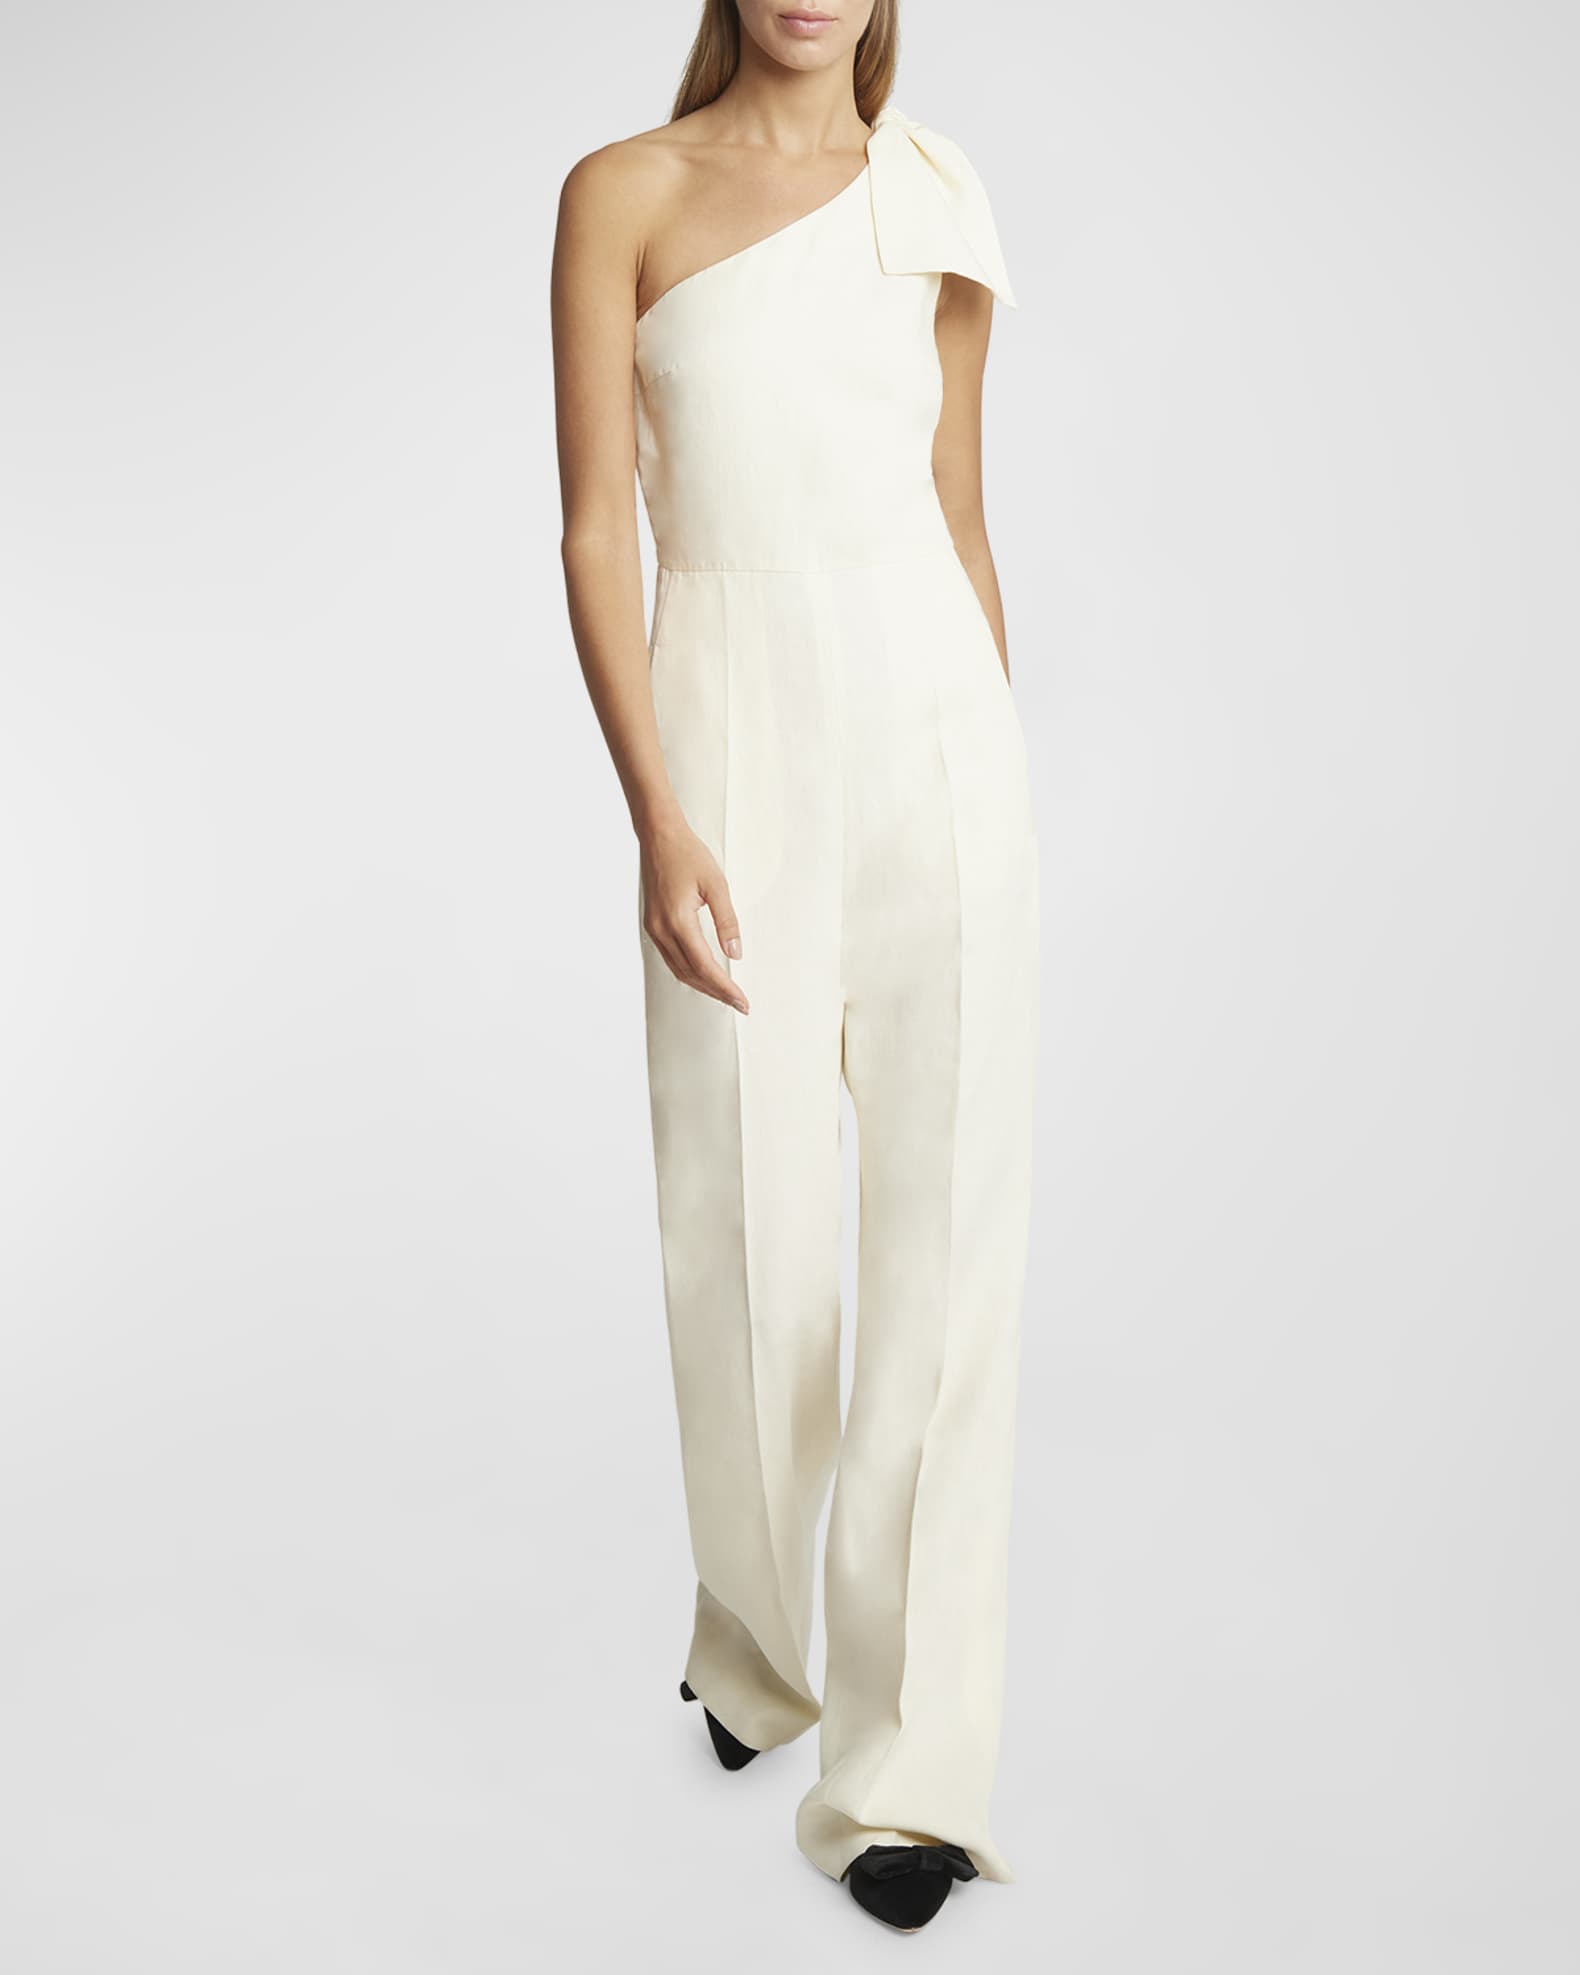 The Perfect Jumpsuit – Chloe and Elenore